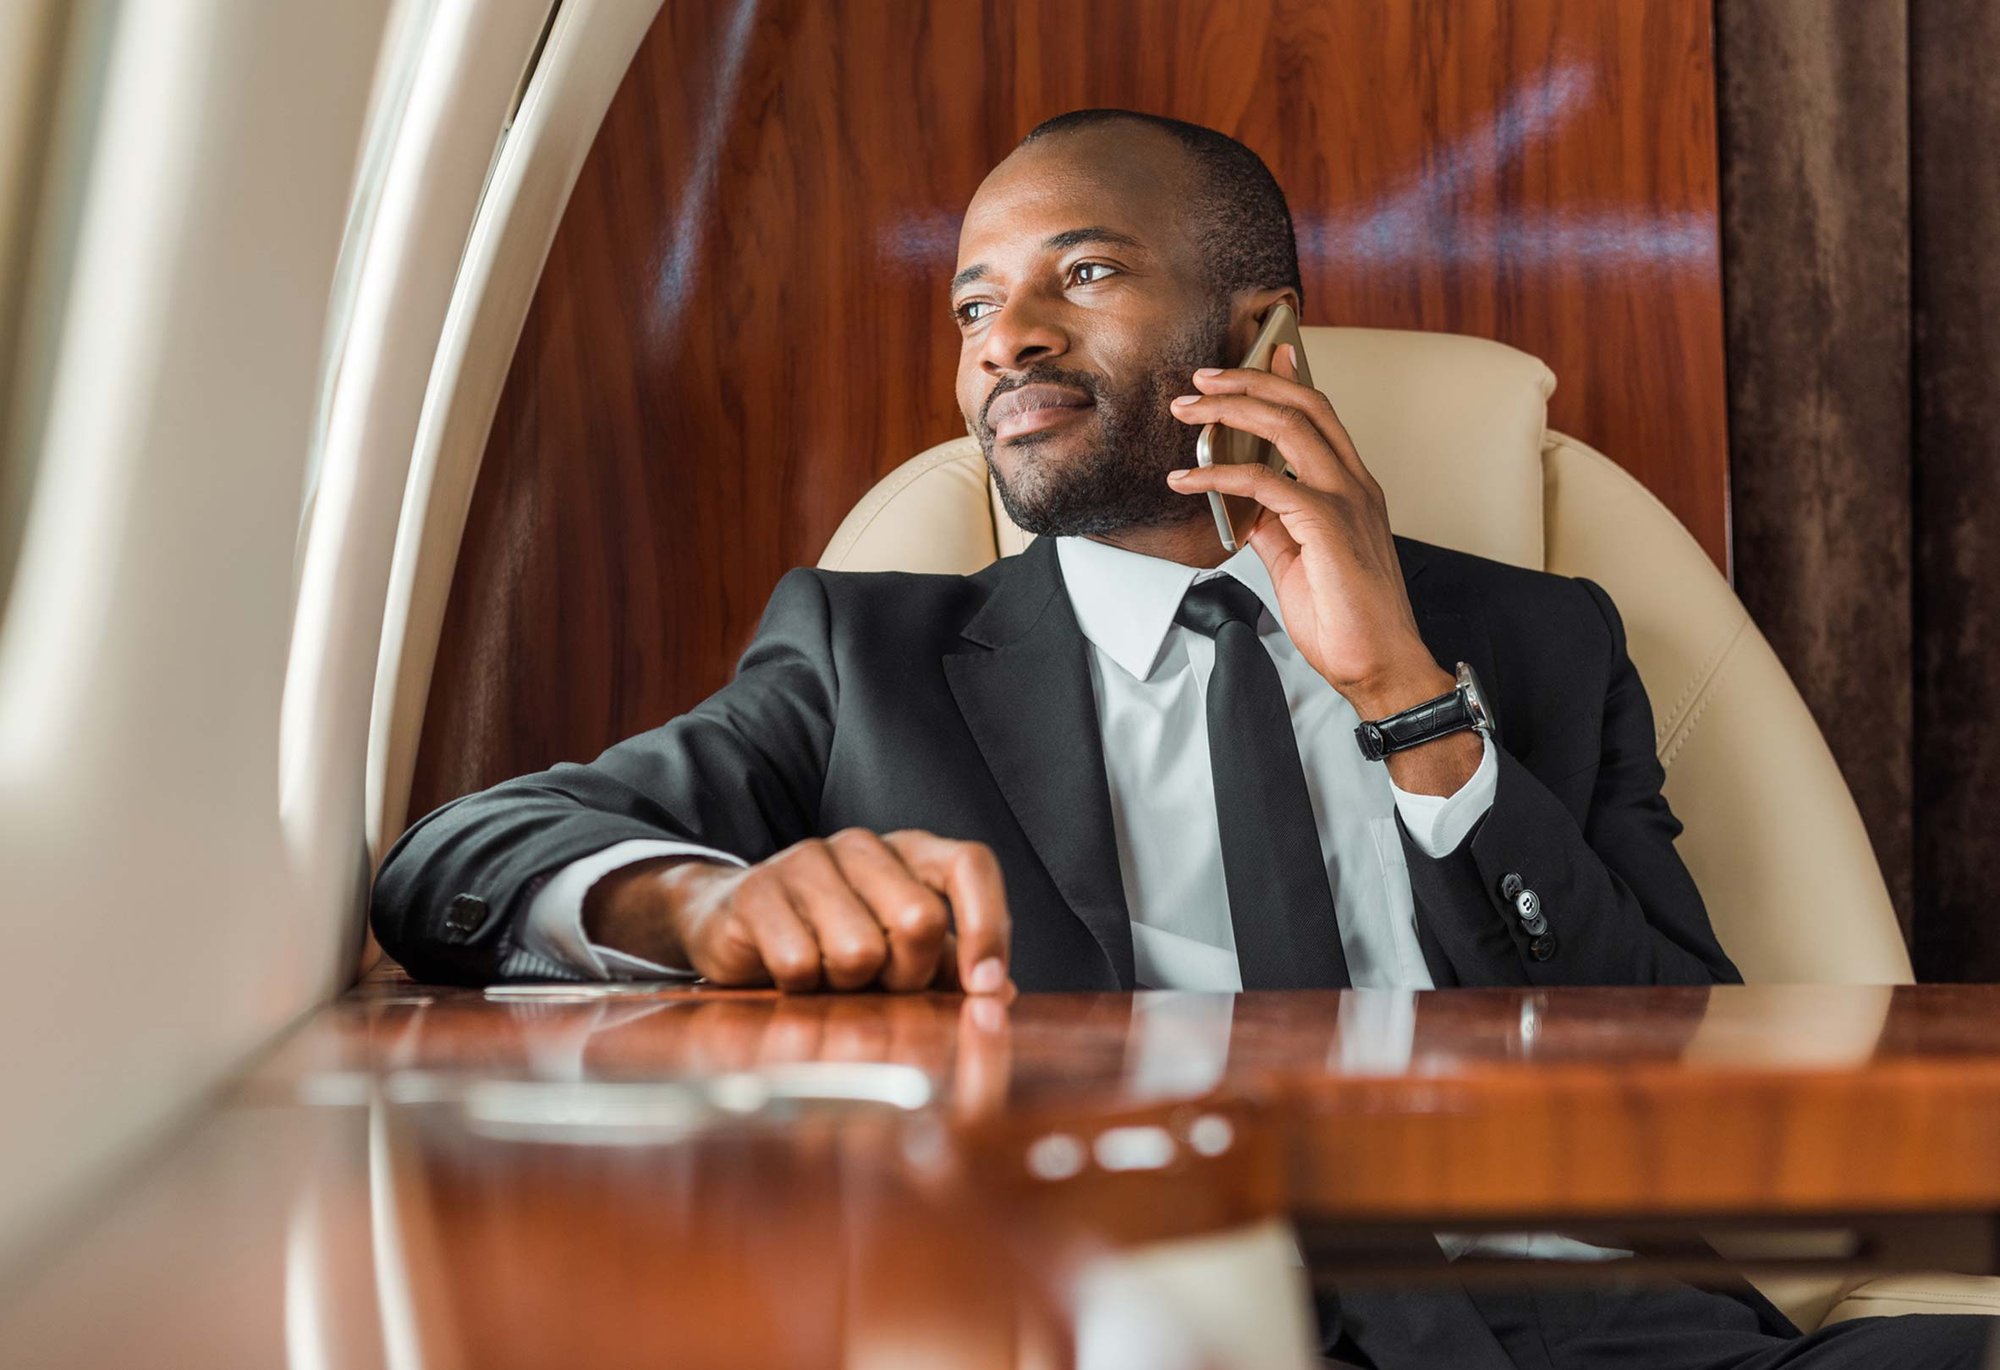 Businessman on the phone inside a private jet